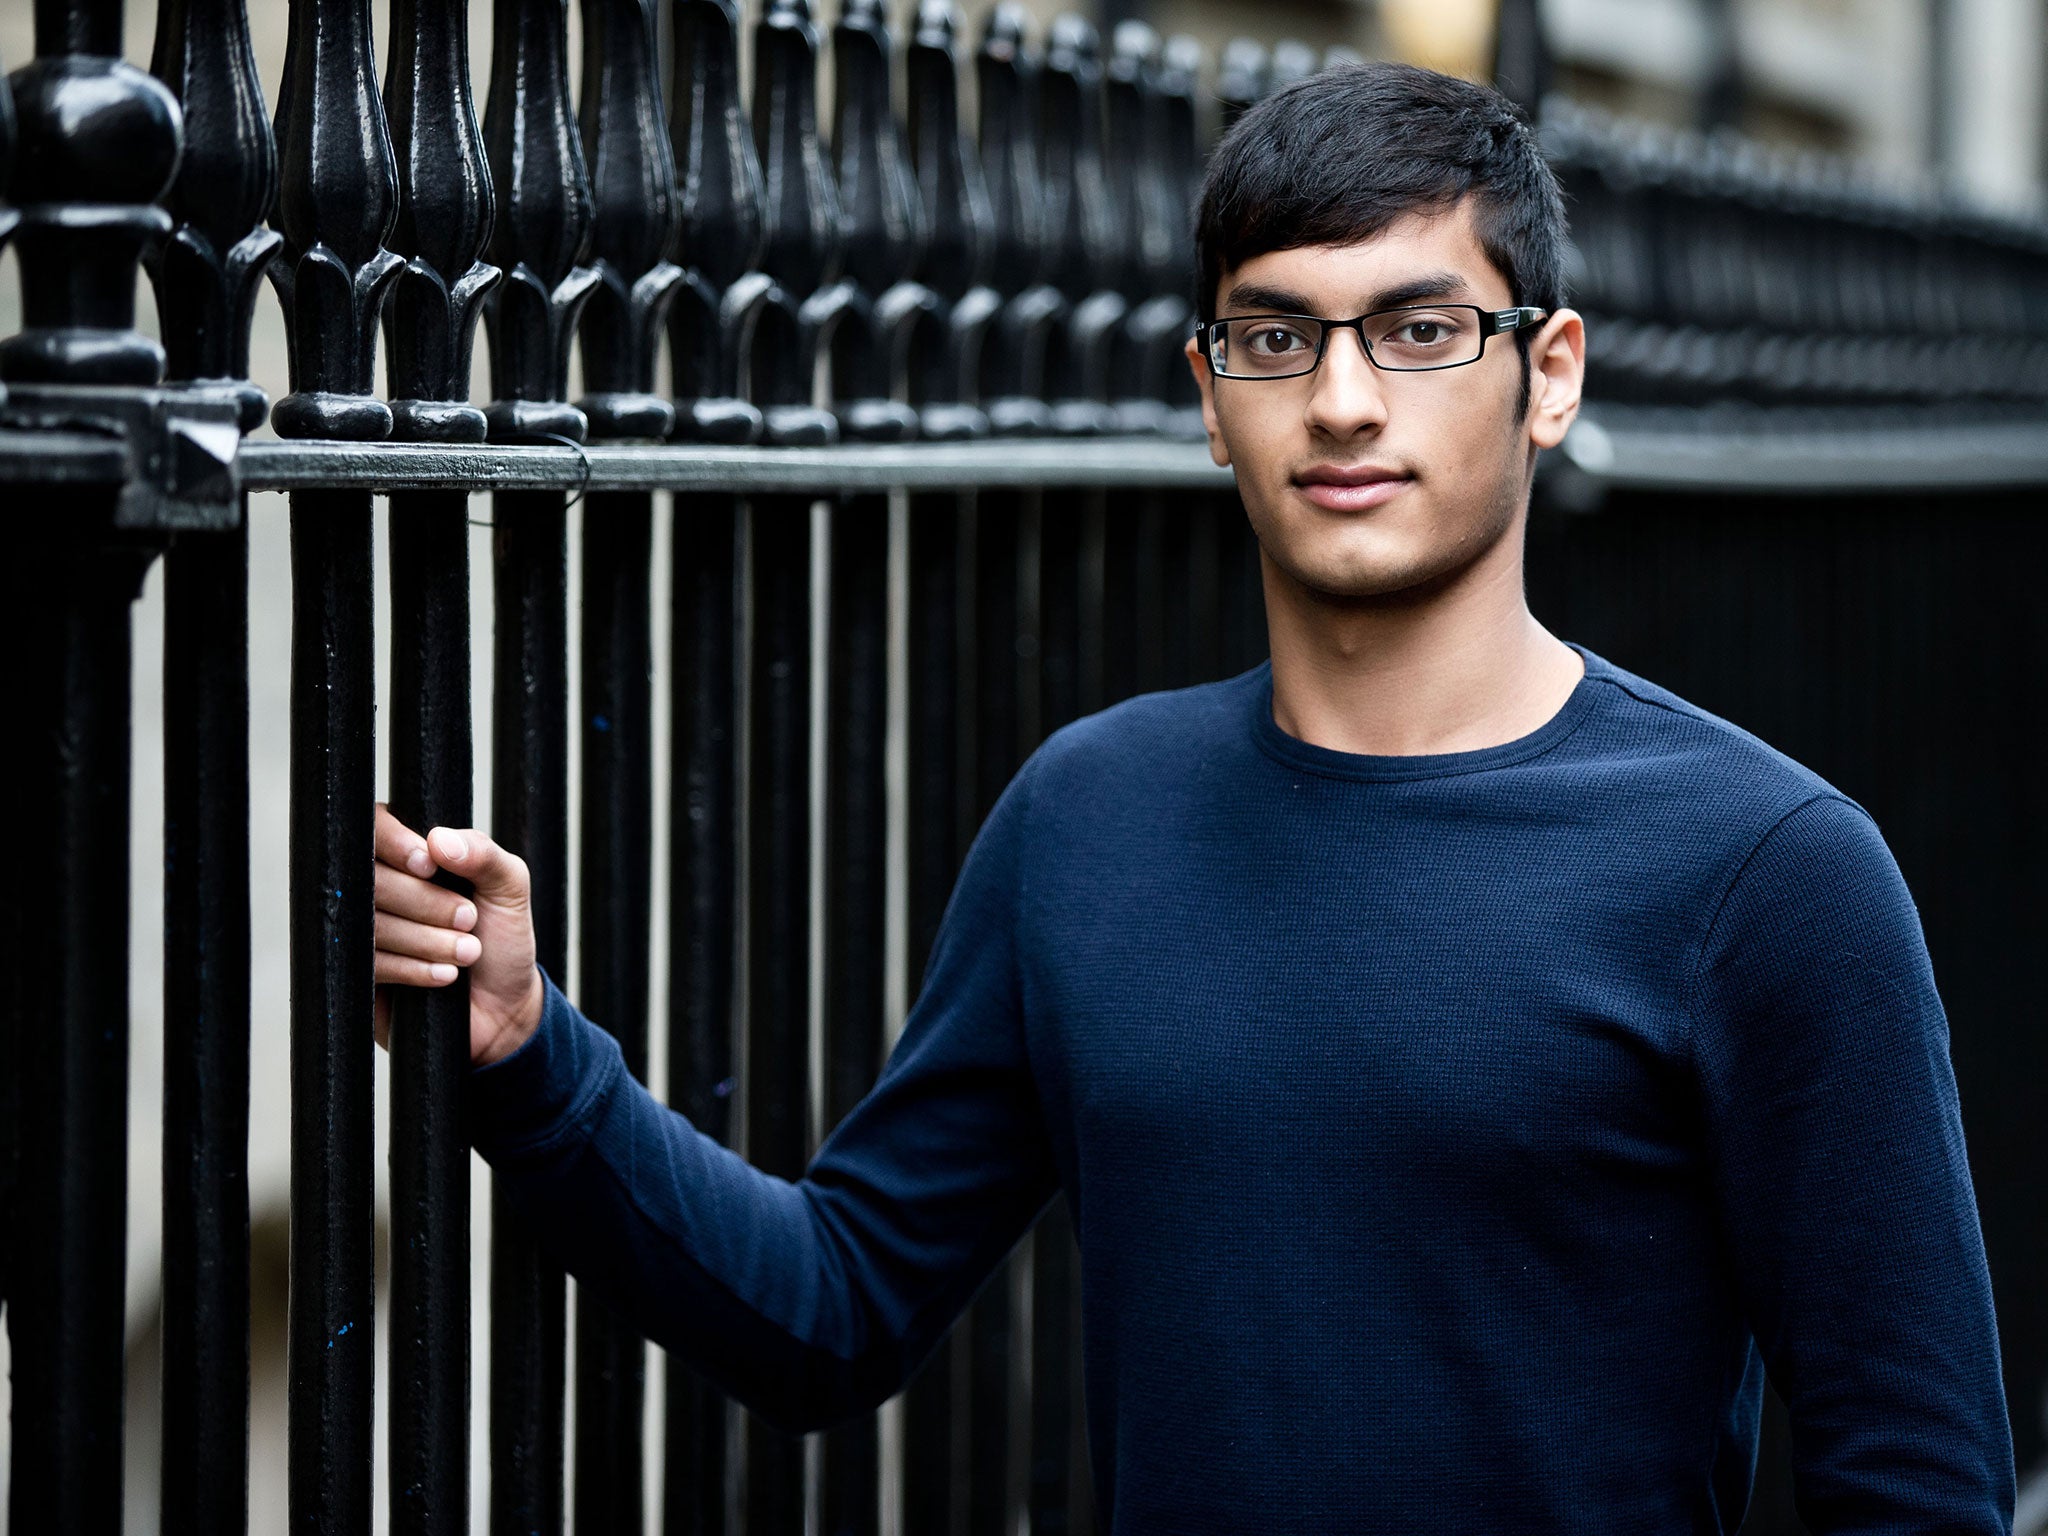 Maksud Rahman, 18, will be the first member of his family to go to university